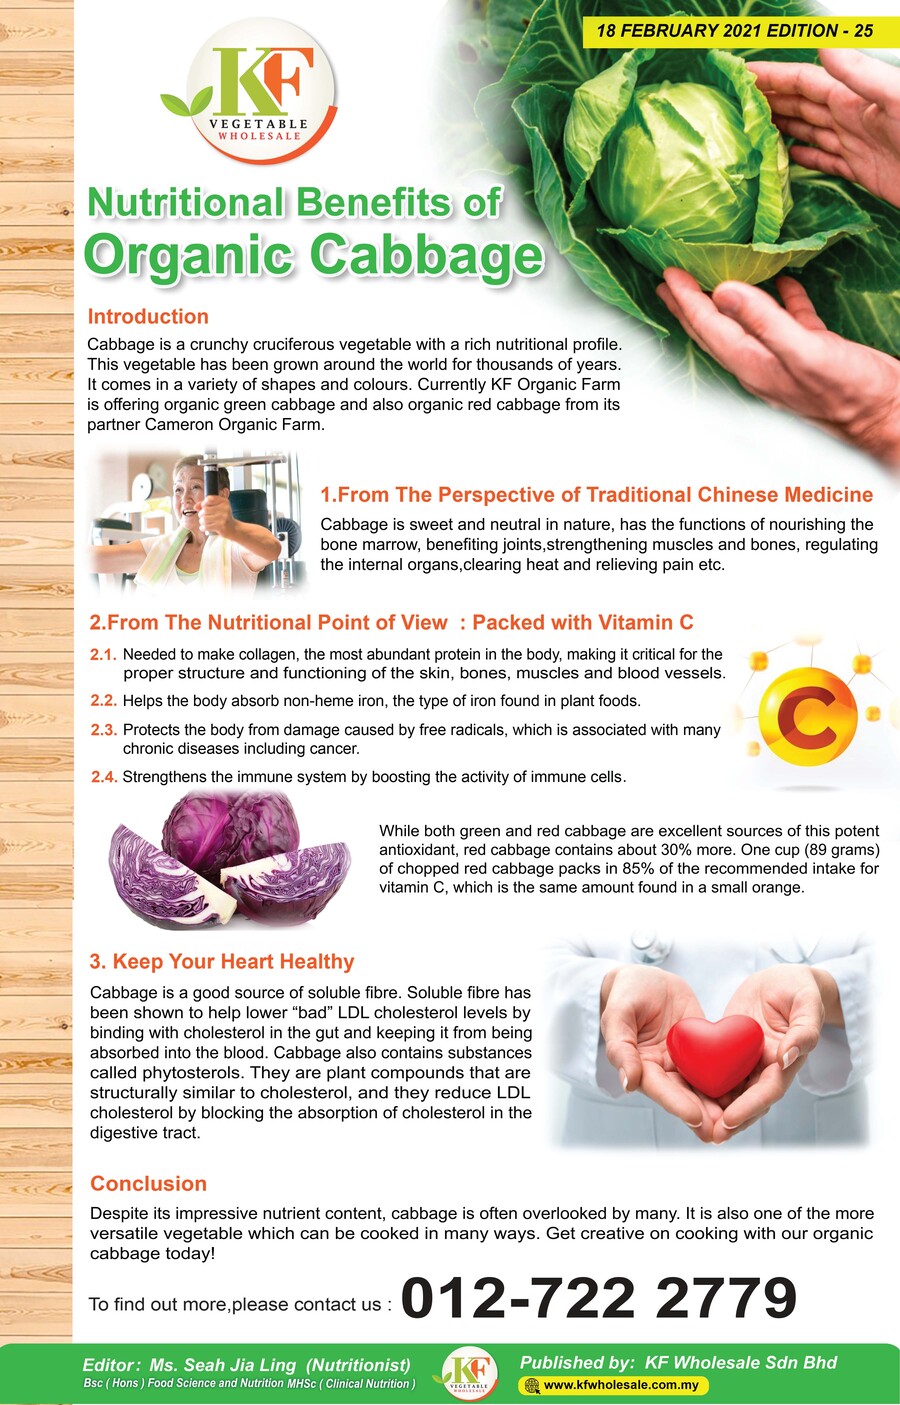 Nutritional Benefits of Organic Cabbage